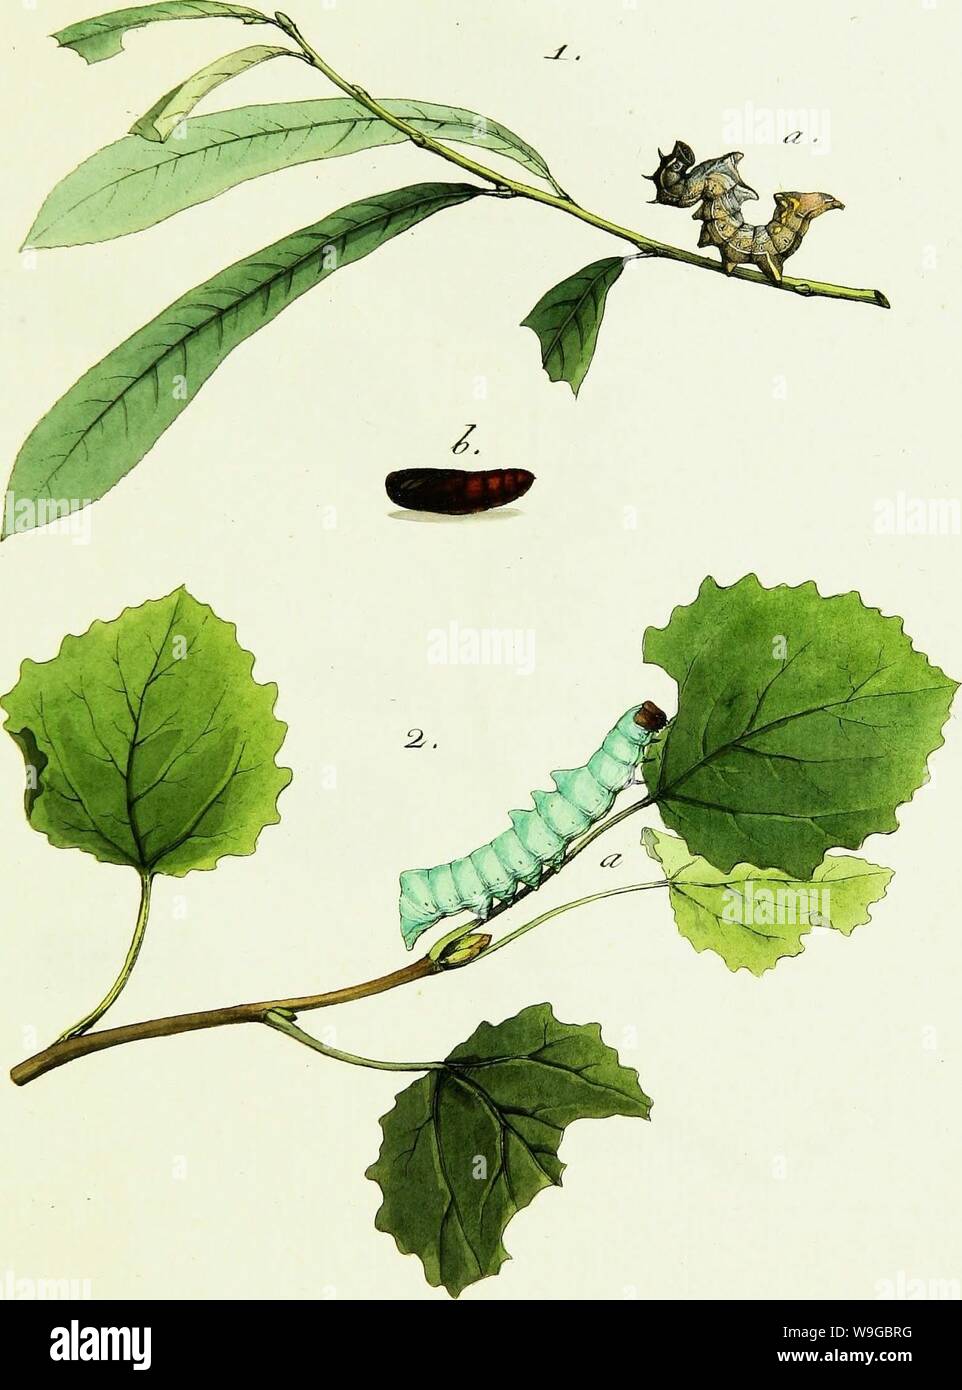 Archive image from page 172 of Geschichte europäischer Schmetterlinge (1806). Geschichte europäischer Schmetterlinge  CUbiodiversity1742385-9607 Year: 1806 ( Jh. W, &lt;n)Tt. J&. M-om&tces, T. vJjbhhpo®,, Q     i . a . -6. pÄi&f . Stock Photo